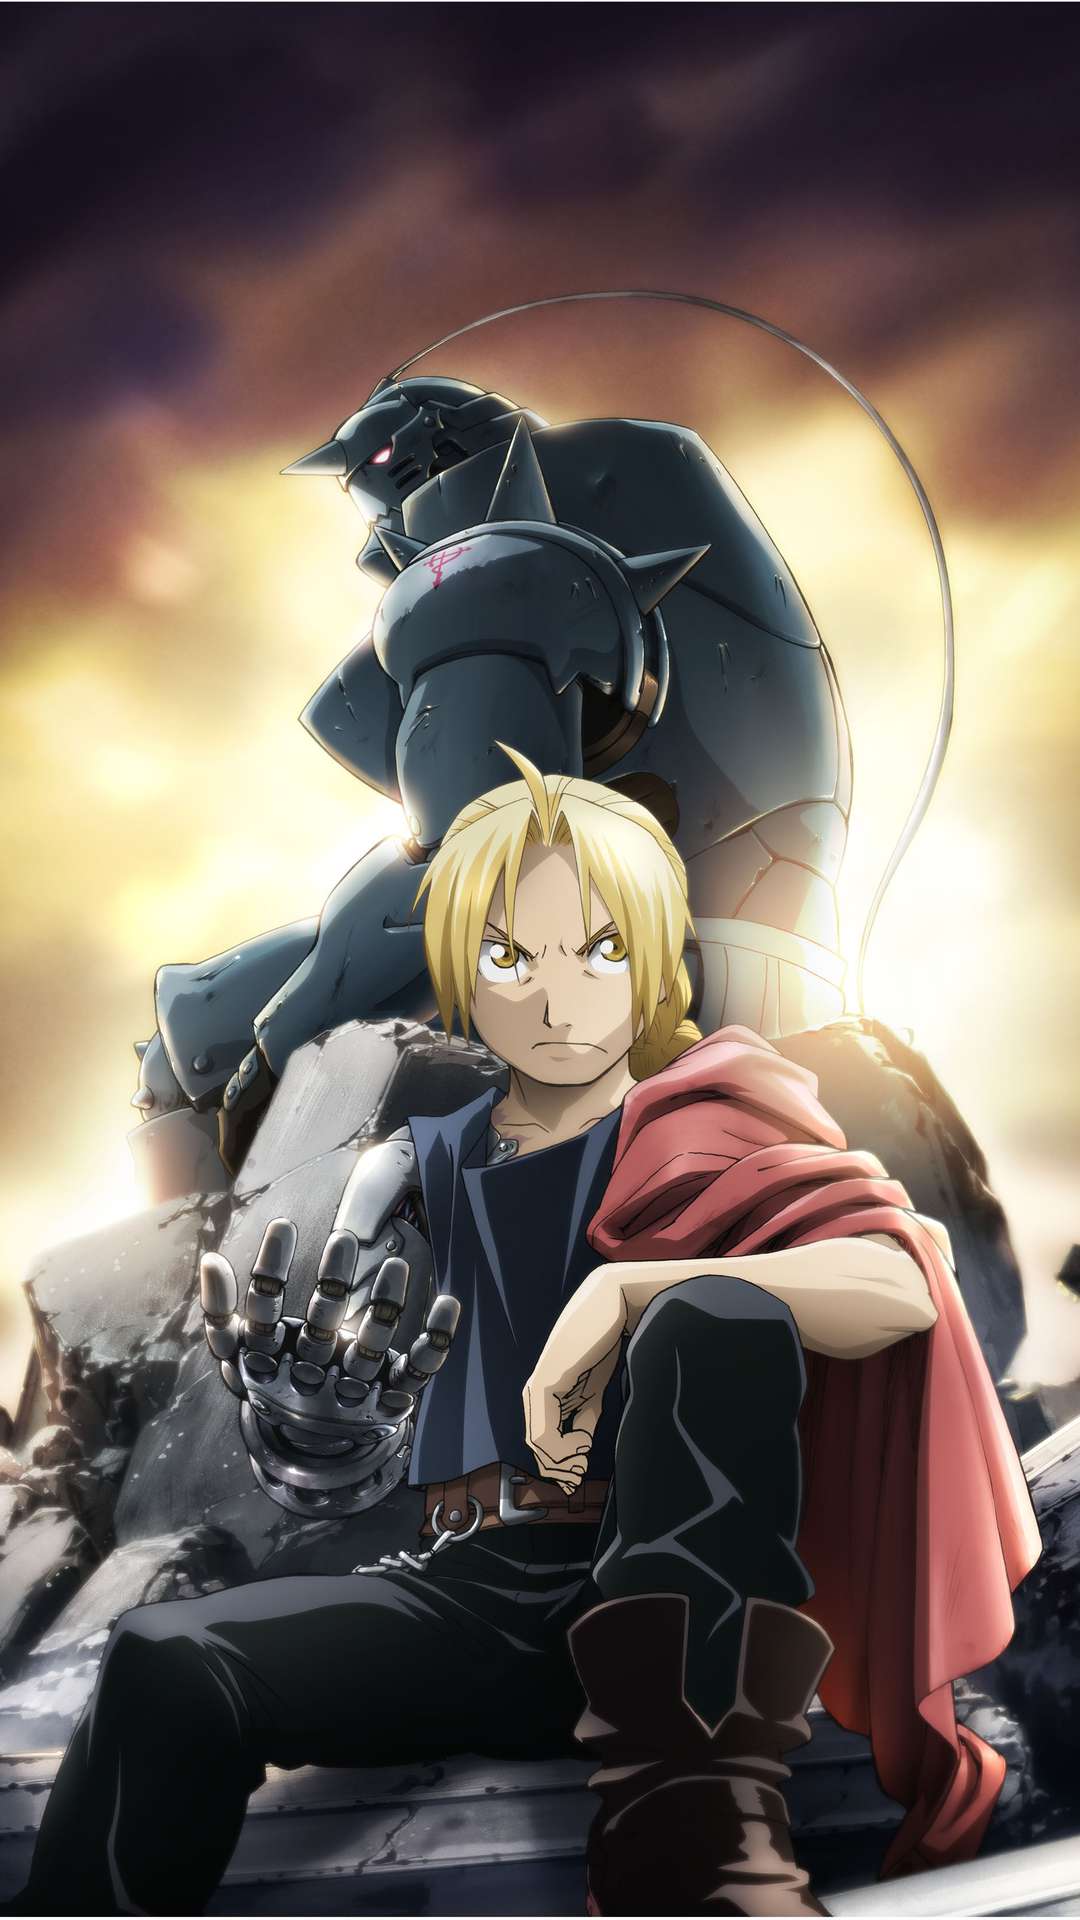 Edward Elric Wallpapers and Backgrounds  WallpaperCG